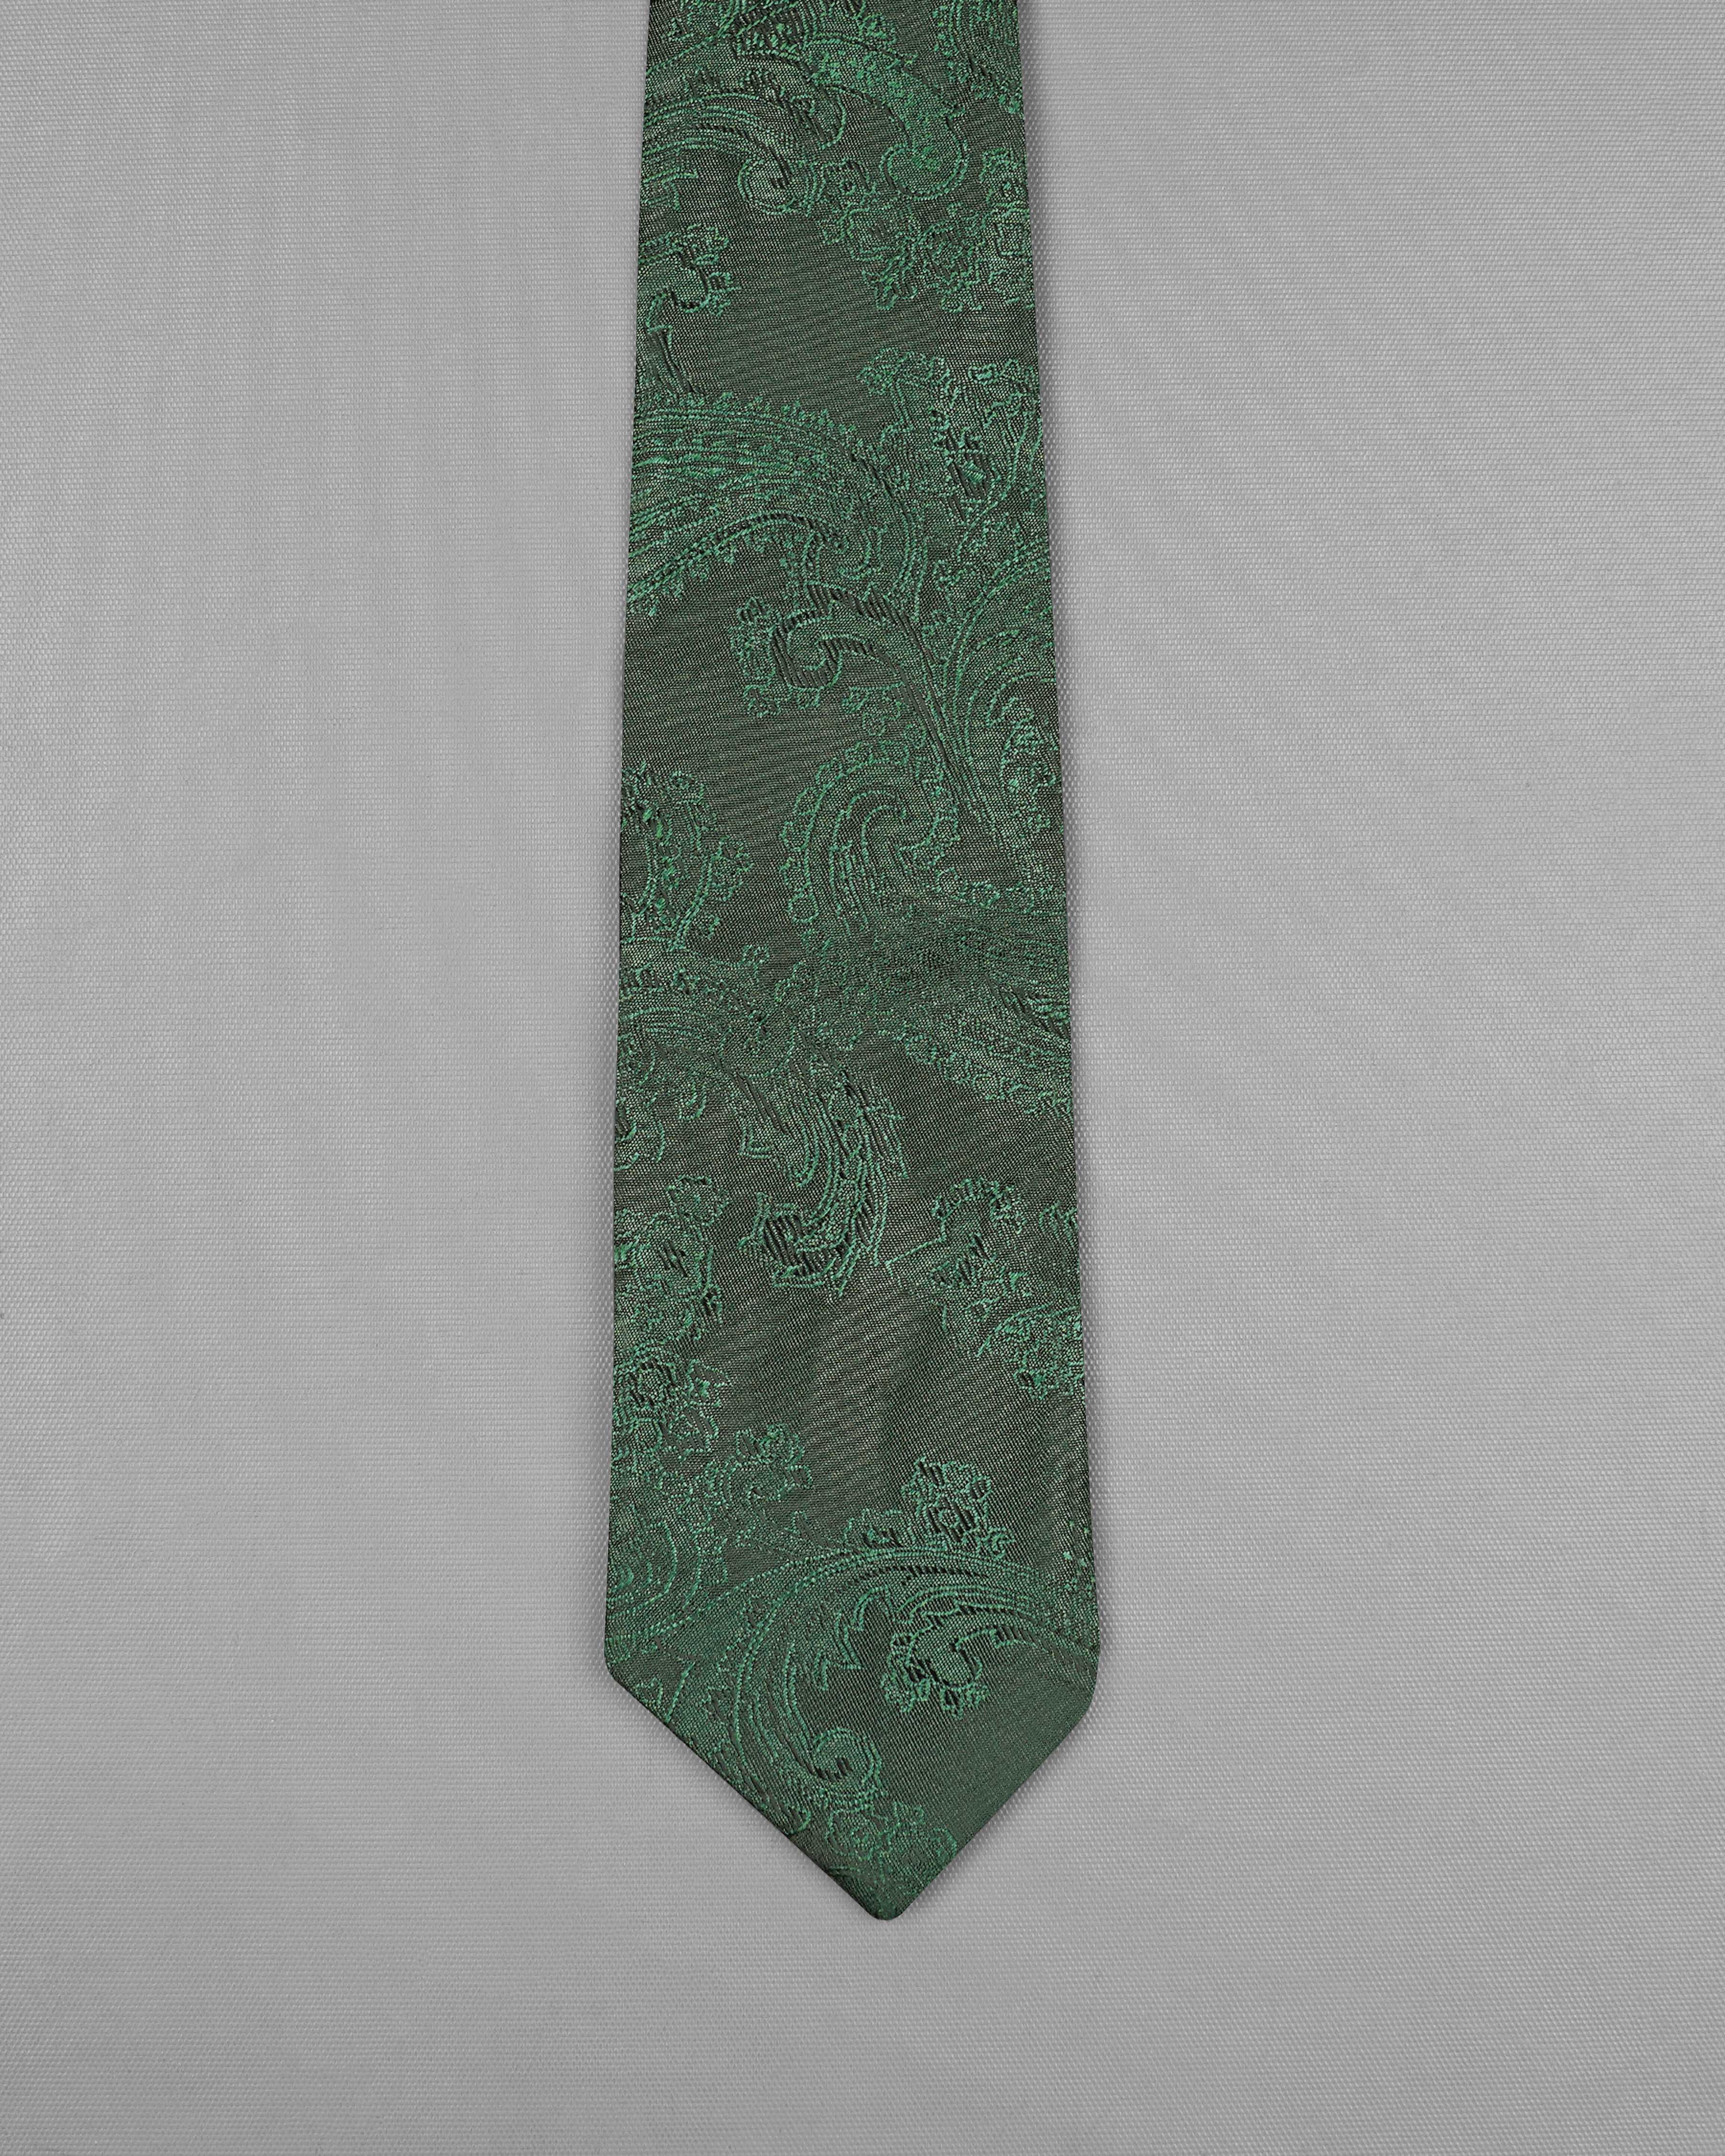 Limed Spruce Dark Green Paisley Jacquard Tie with Pocket Square TP041